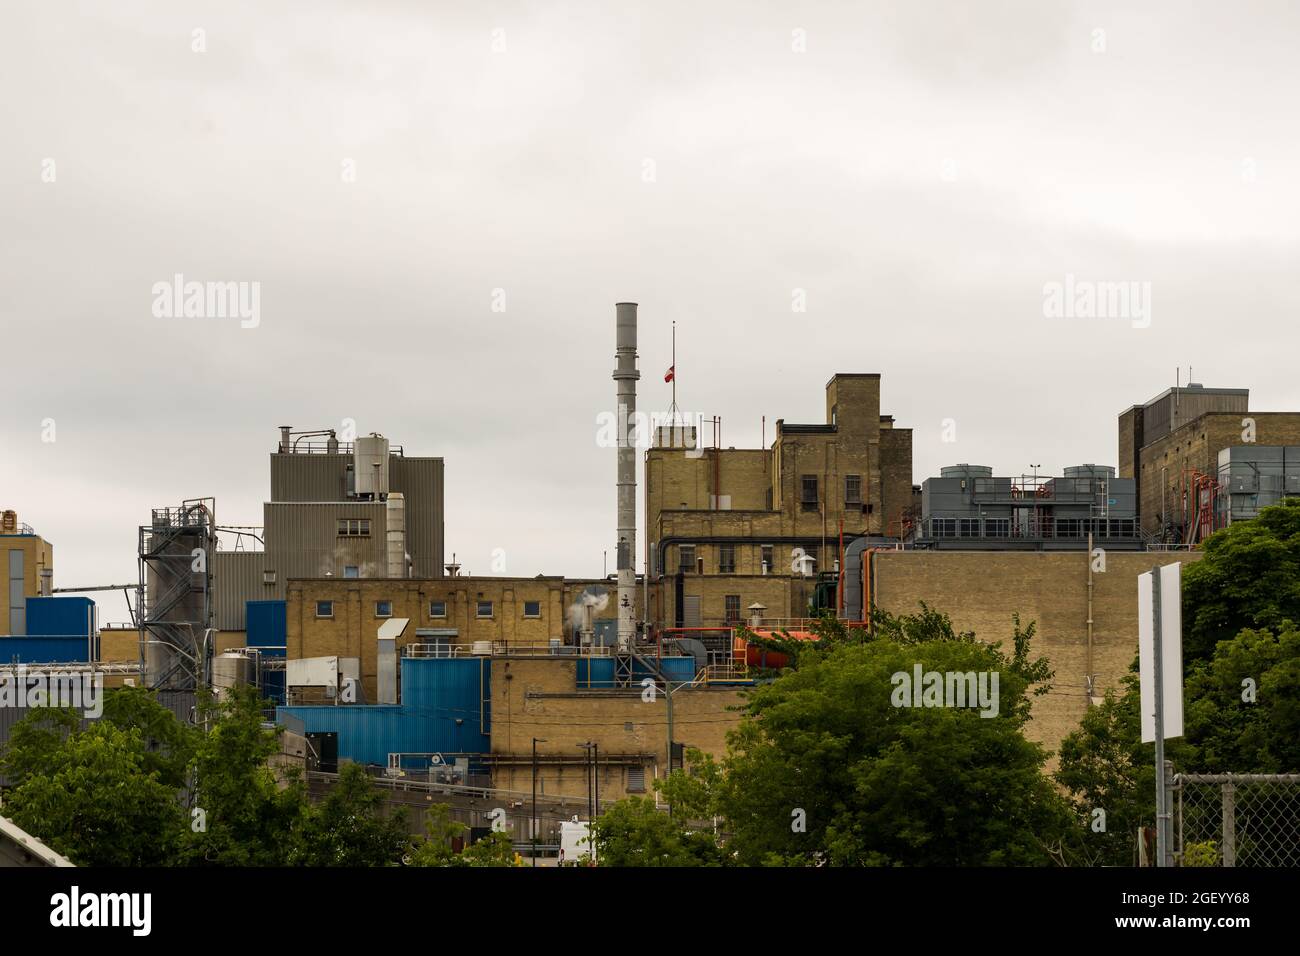 London, Ontario, Canada - July 12 2021. Rear view of Labbat's Brewing Company as viewed from a bridge. Stock Photo